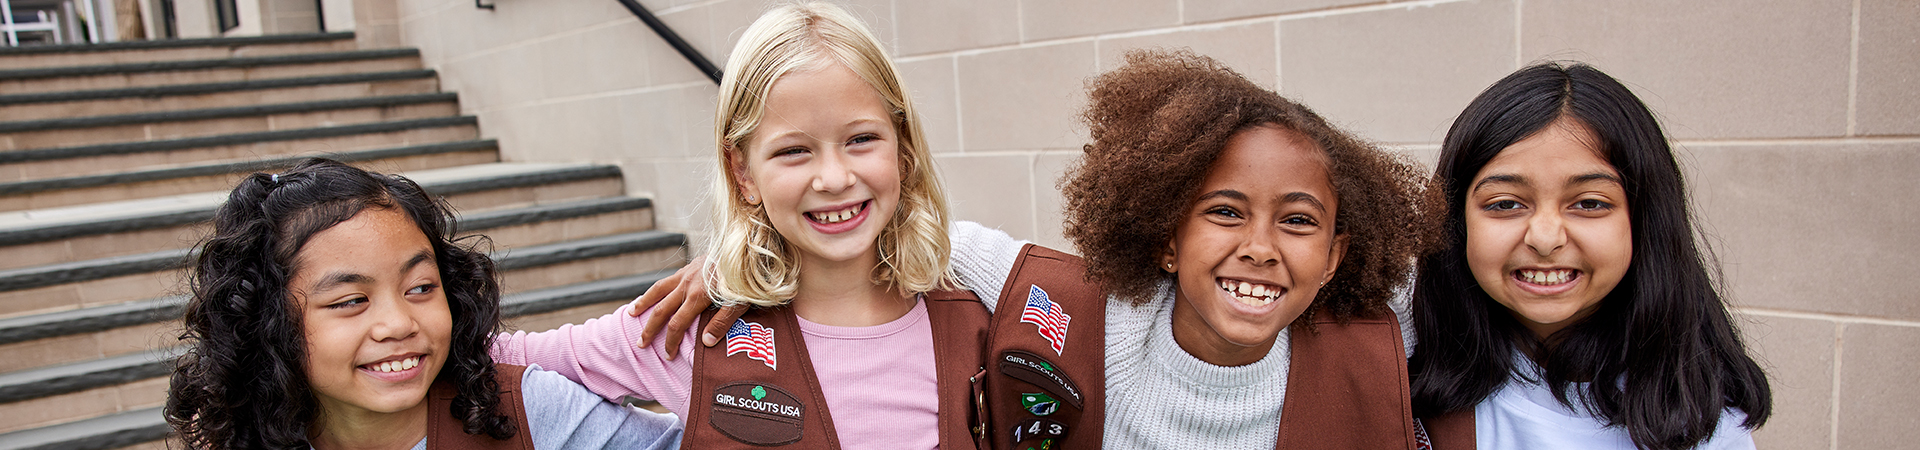  smiling group of diverse girl scouts outside 